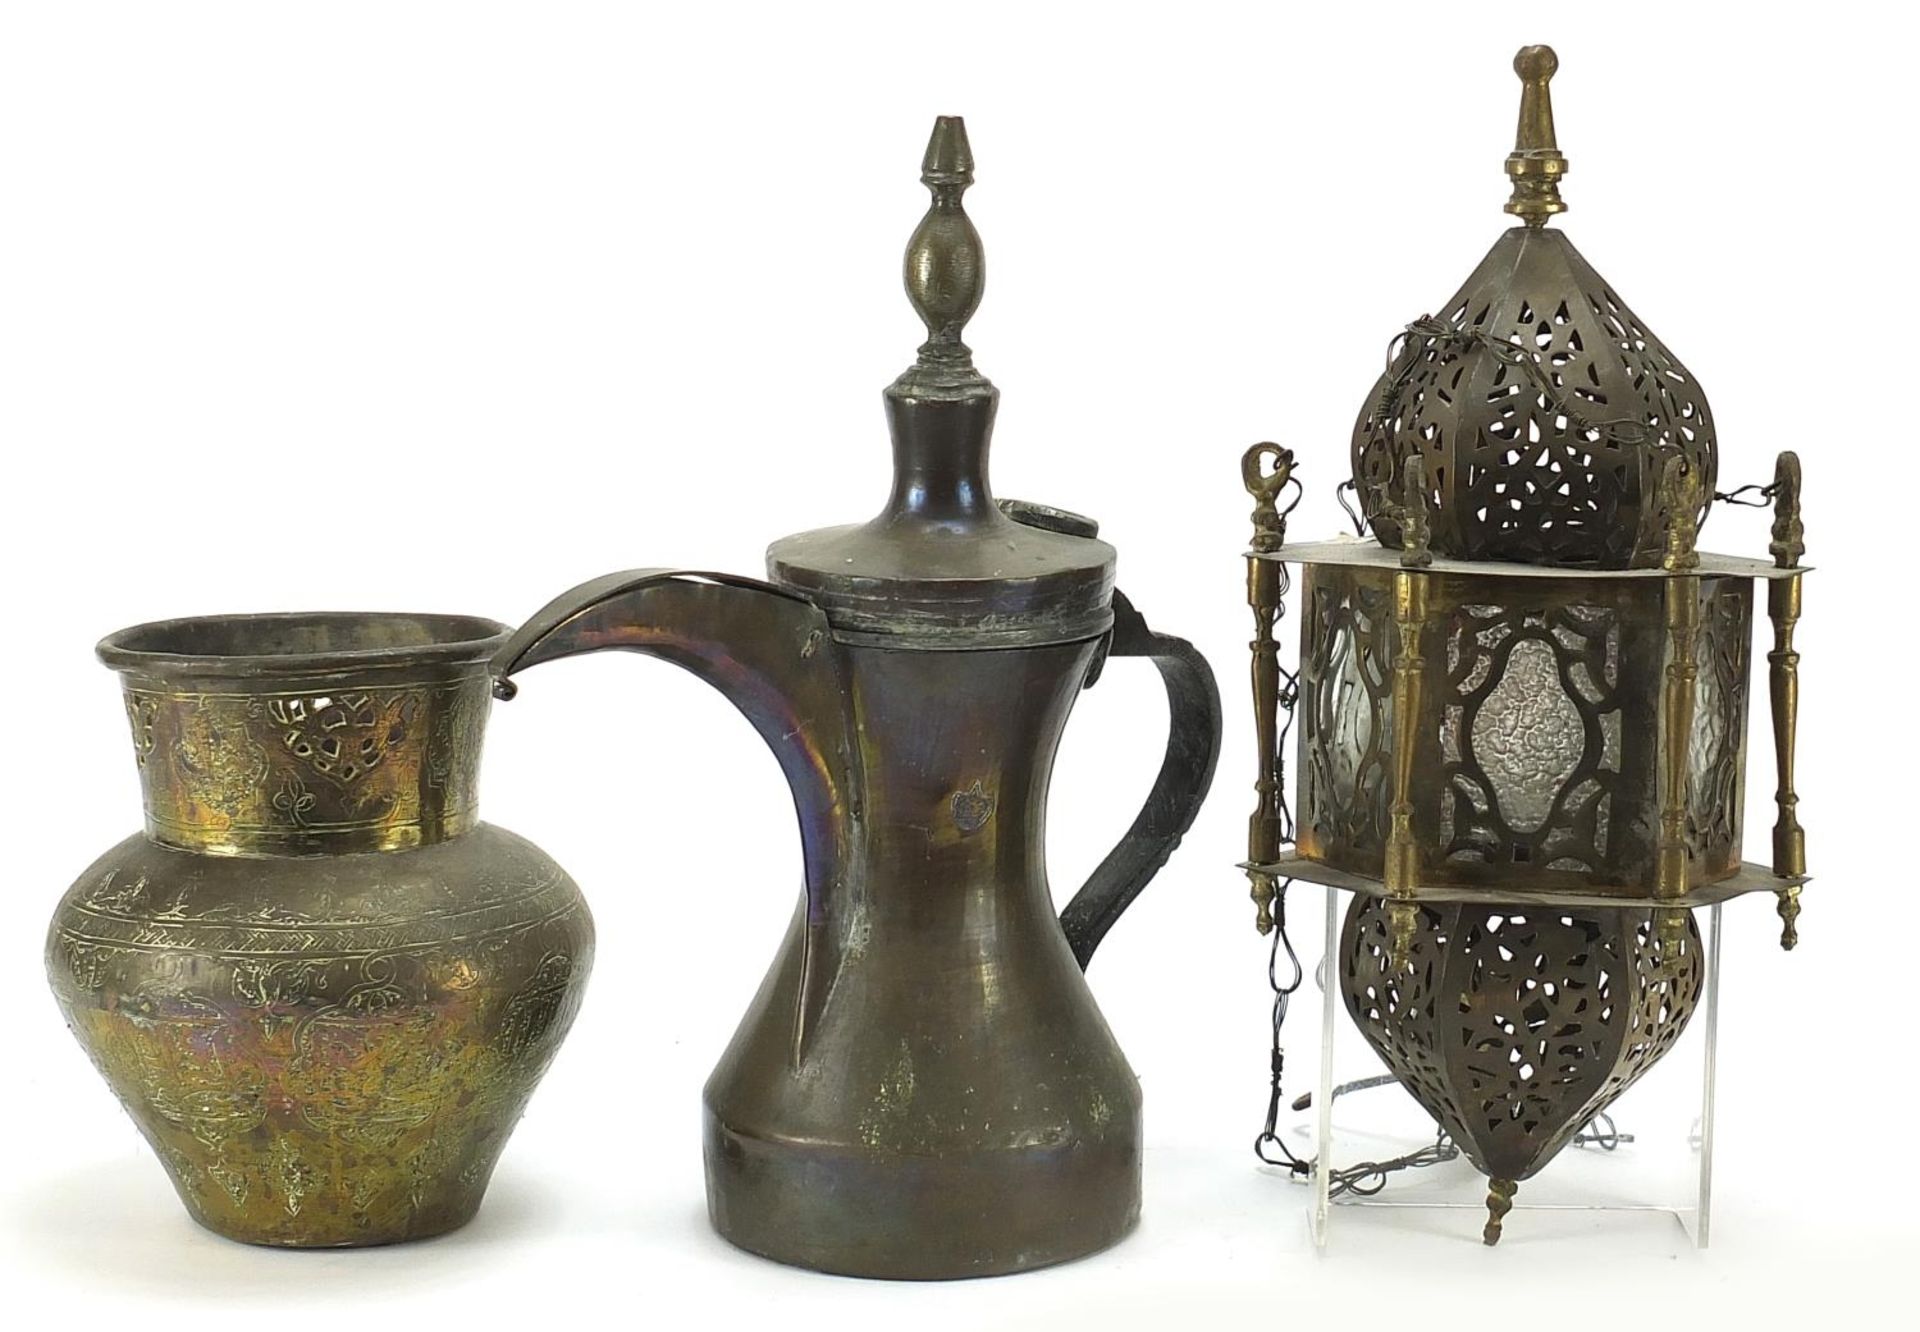 Middle Eastern metalware including an Omani coffee pot and Moroccan hanging lamp, the largest 30.5c